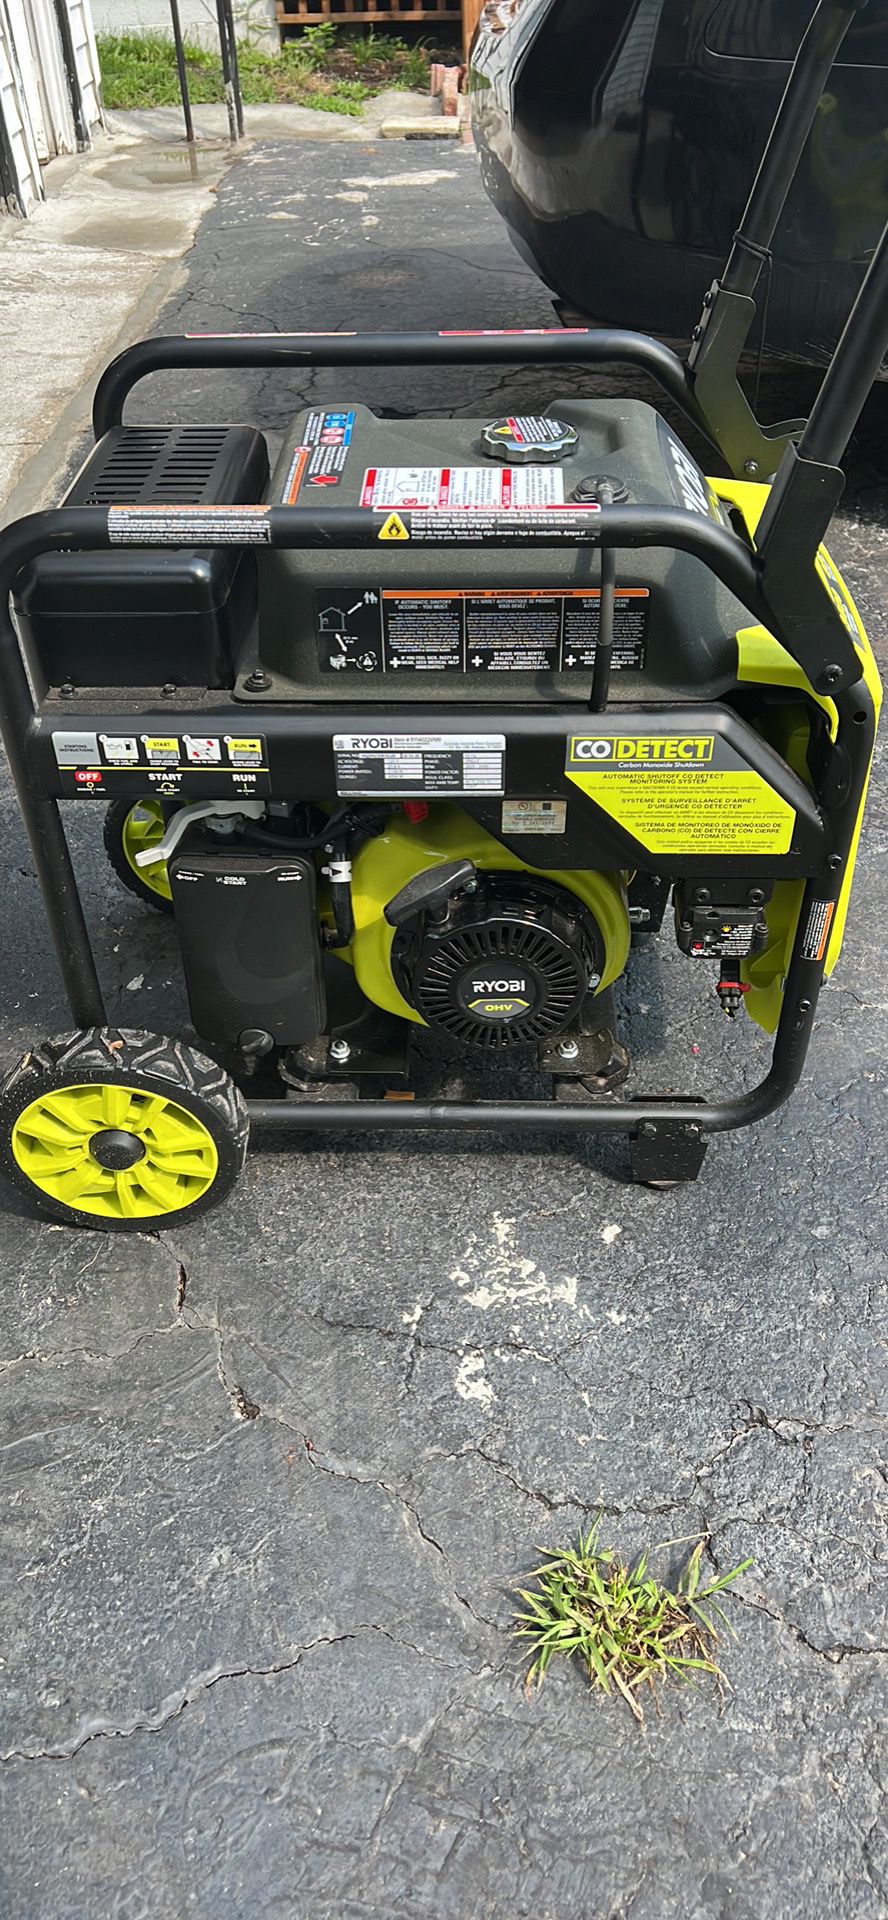 Brand New Gas Operated Generator  Never Been Used Opens Bight It For My Trailer Home But Didn’t Need It 